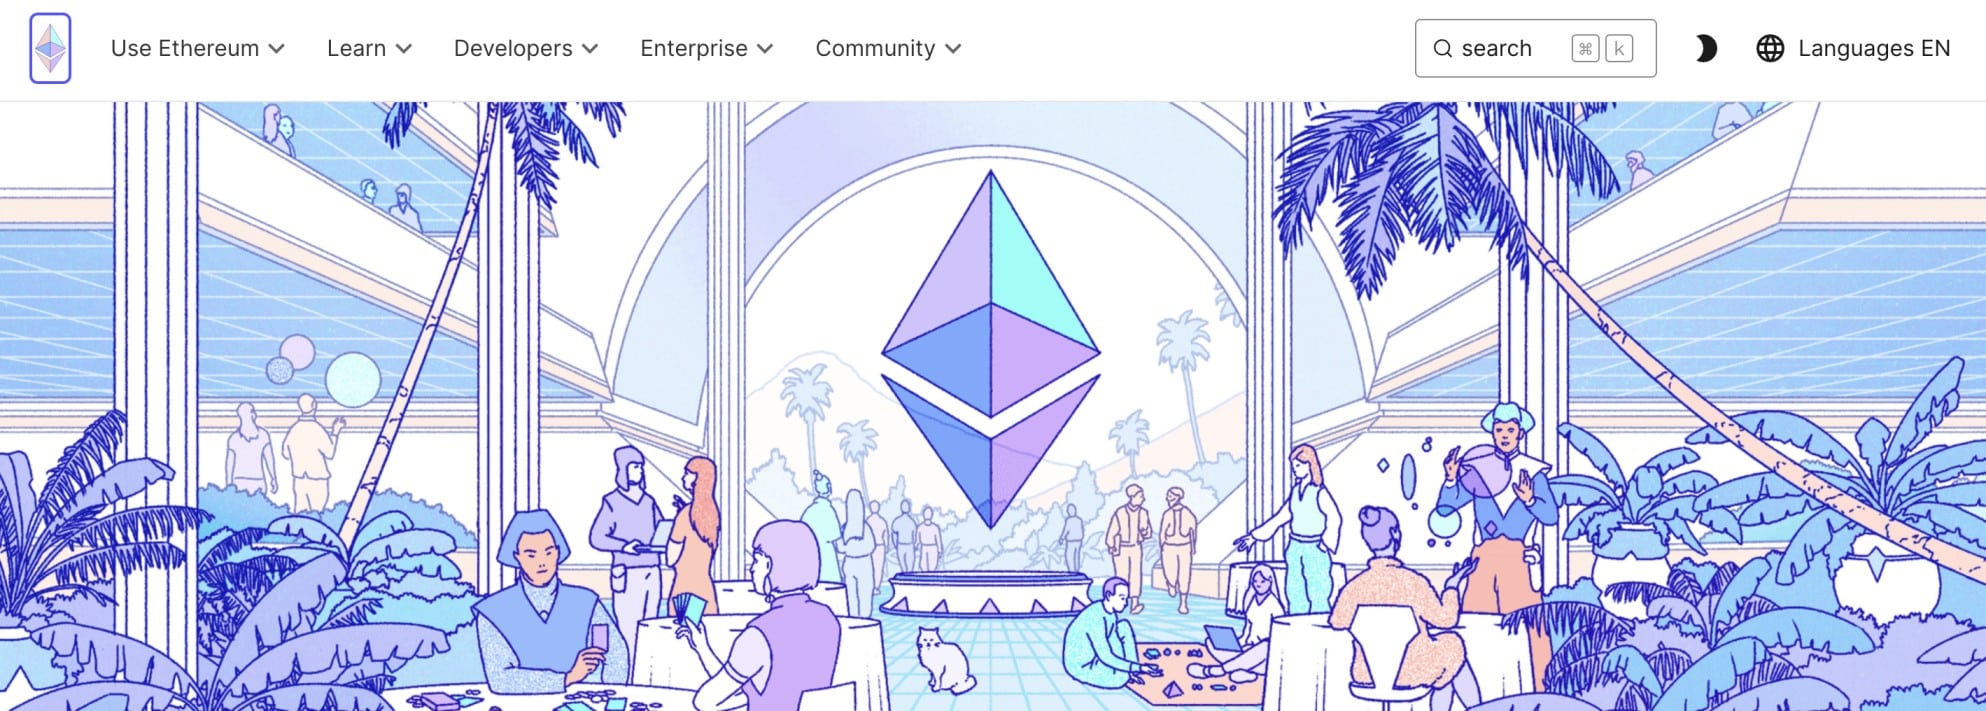 Is Ethereum a good investment?